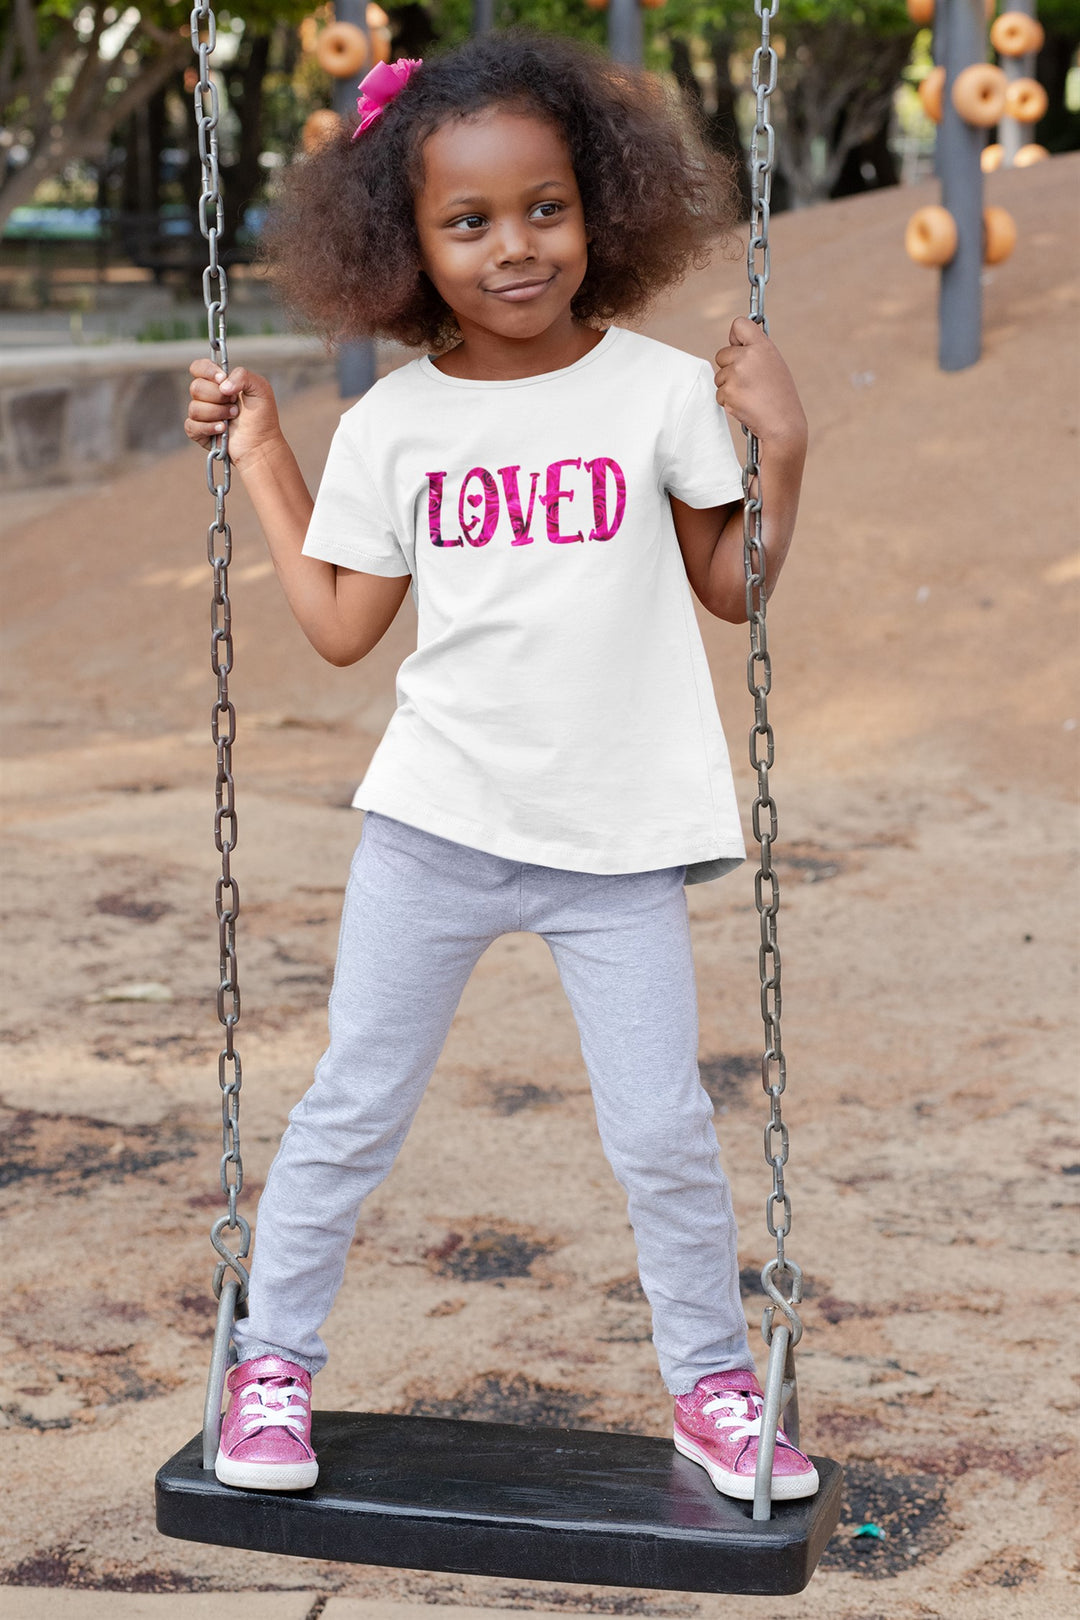 Loved With Heart Pink Roses. Short Sleeve T Shirt For Toddler And Kids. - TeesForToddlersandKids -  t-shirt - holidays, Love - loved-with-heart-pink-roses-short-sleeve-t-shirt-for-toddler-and-kids